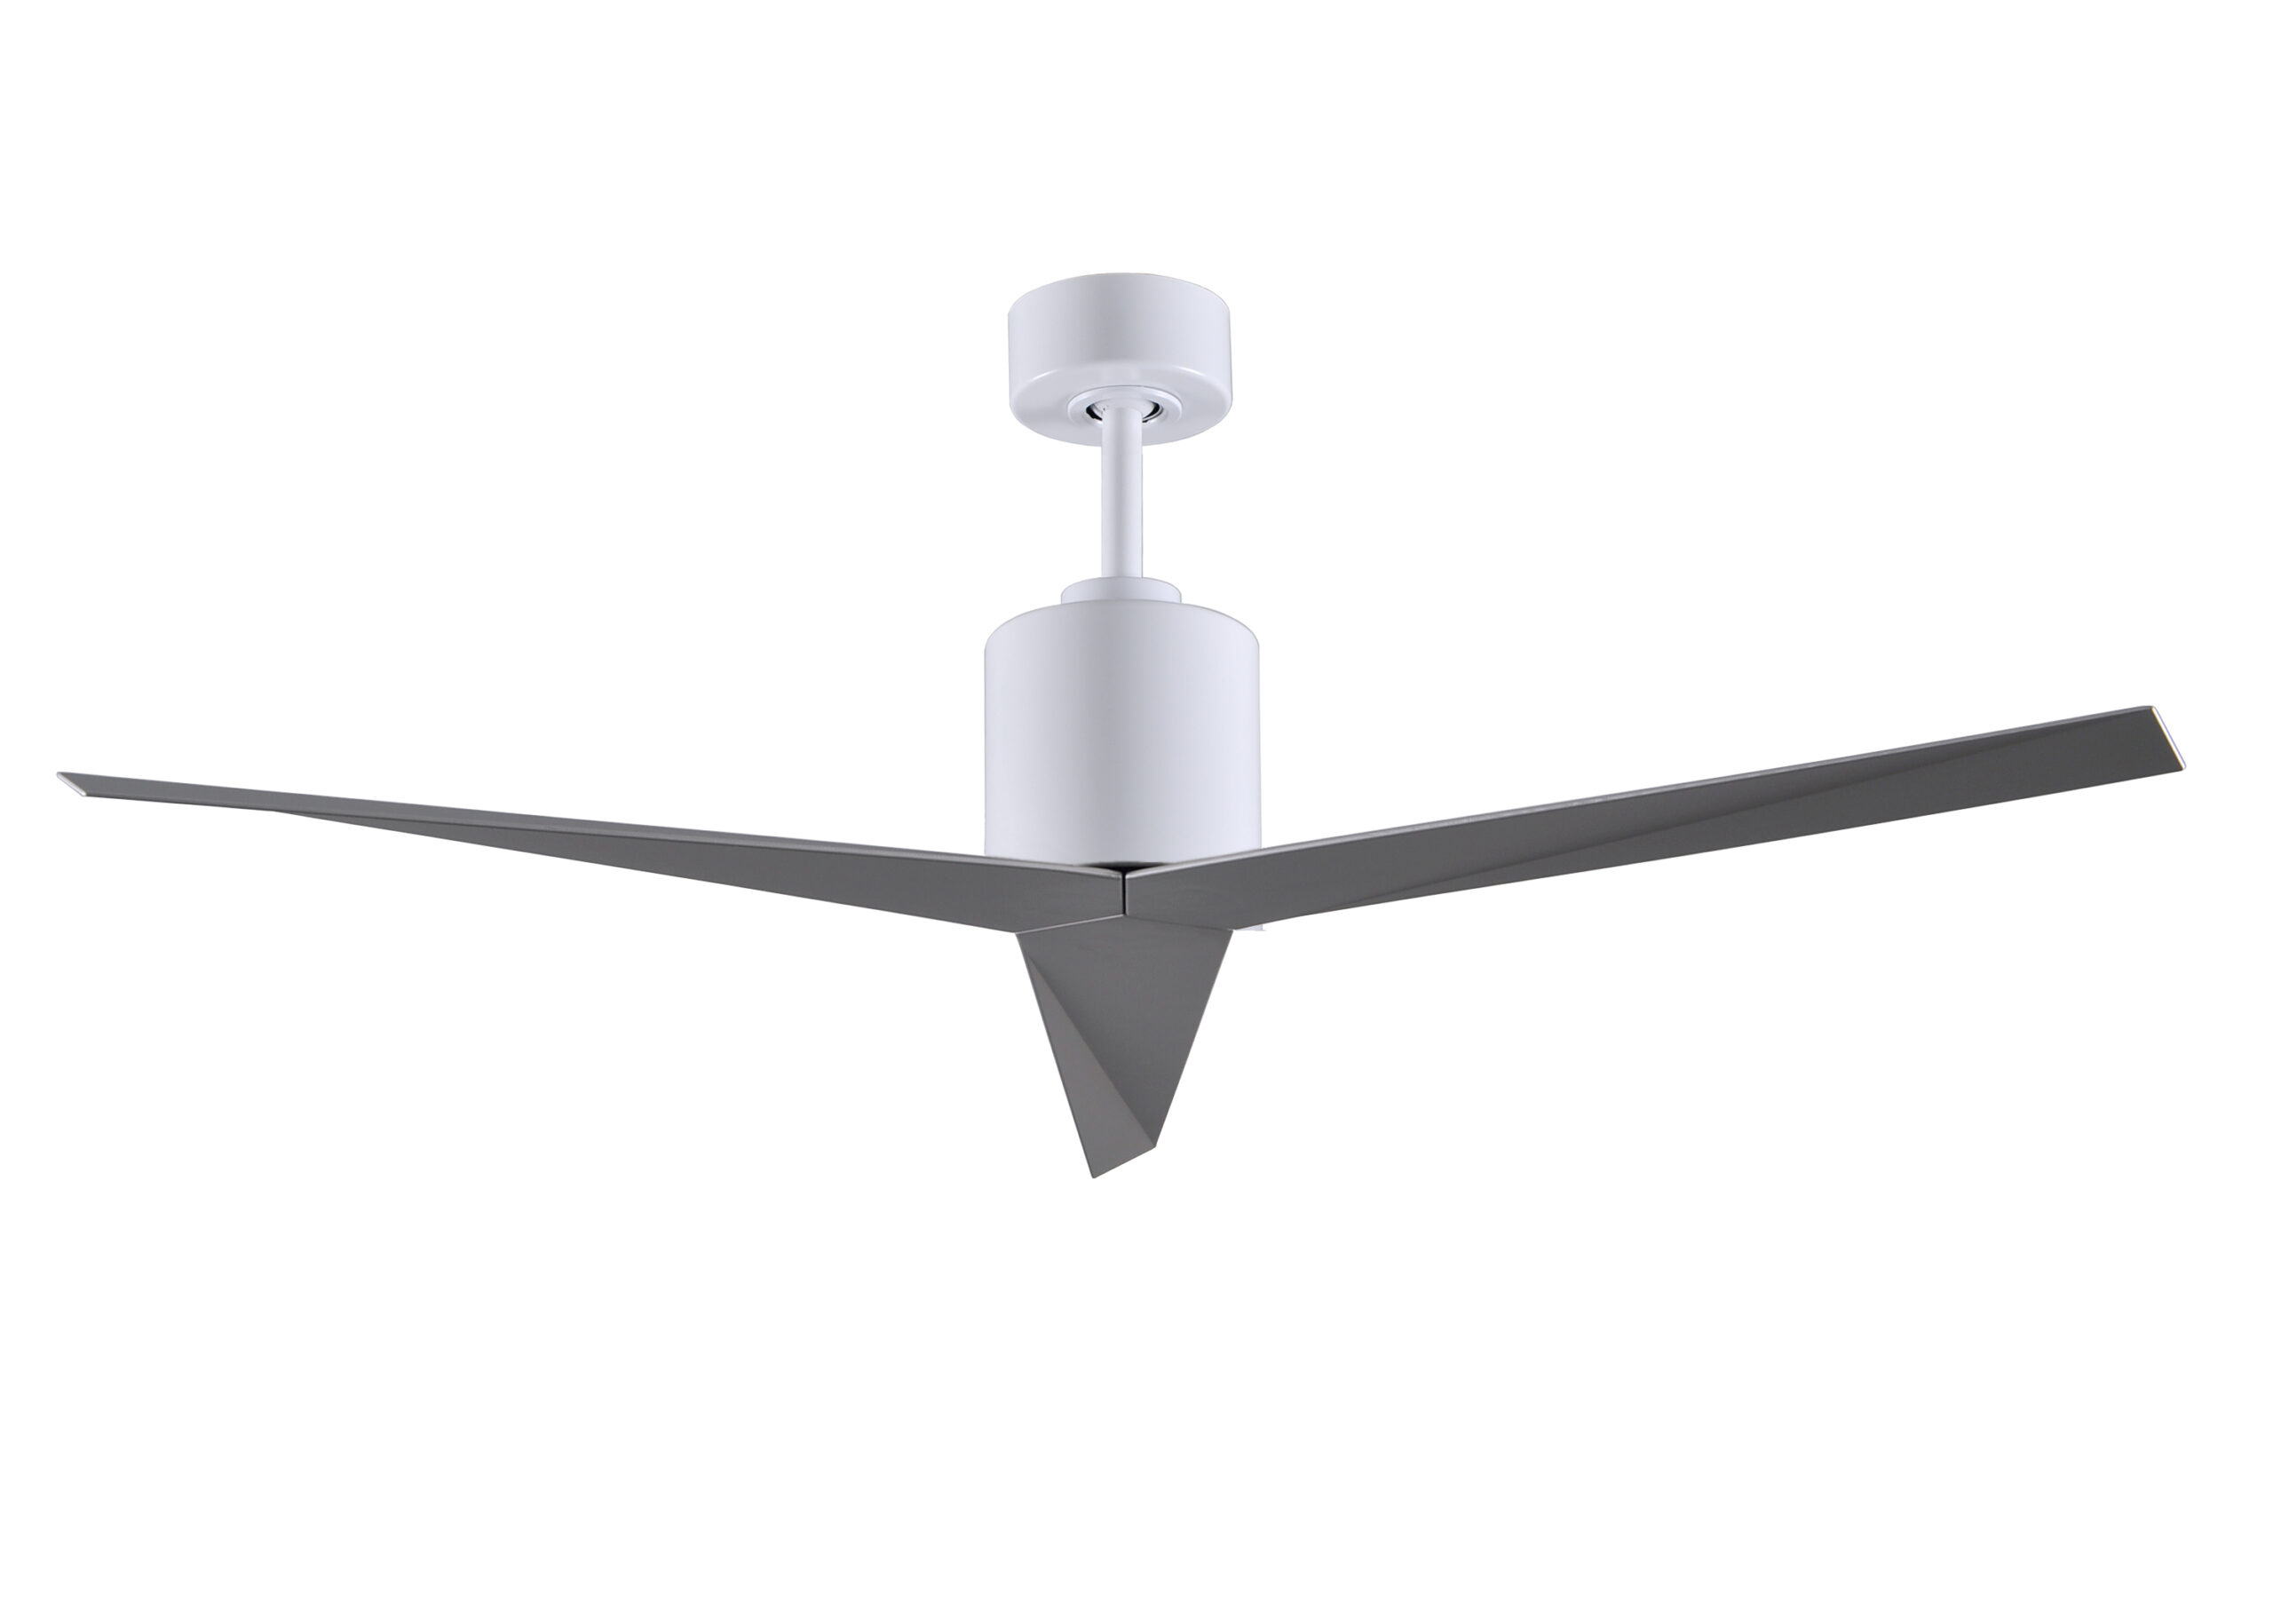 Eliza Ceiling Fan in Gloss White with Brushed Nickel Blades